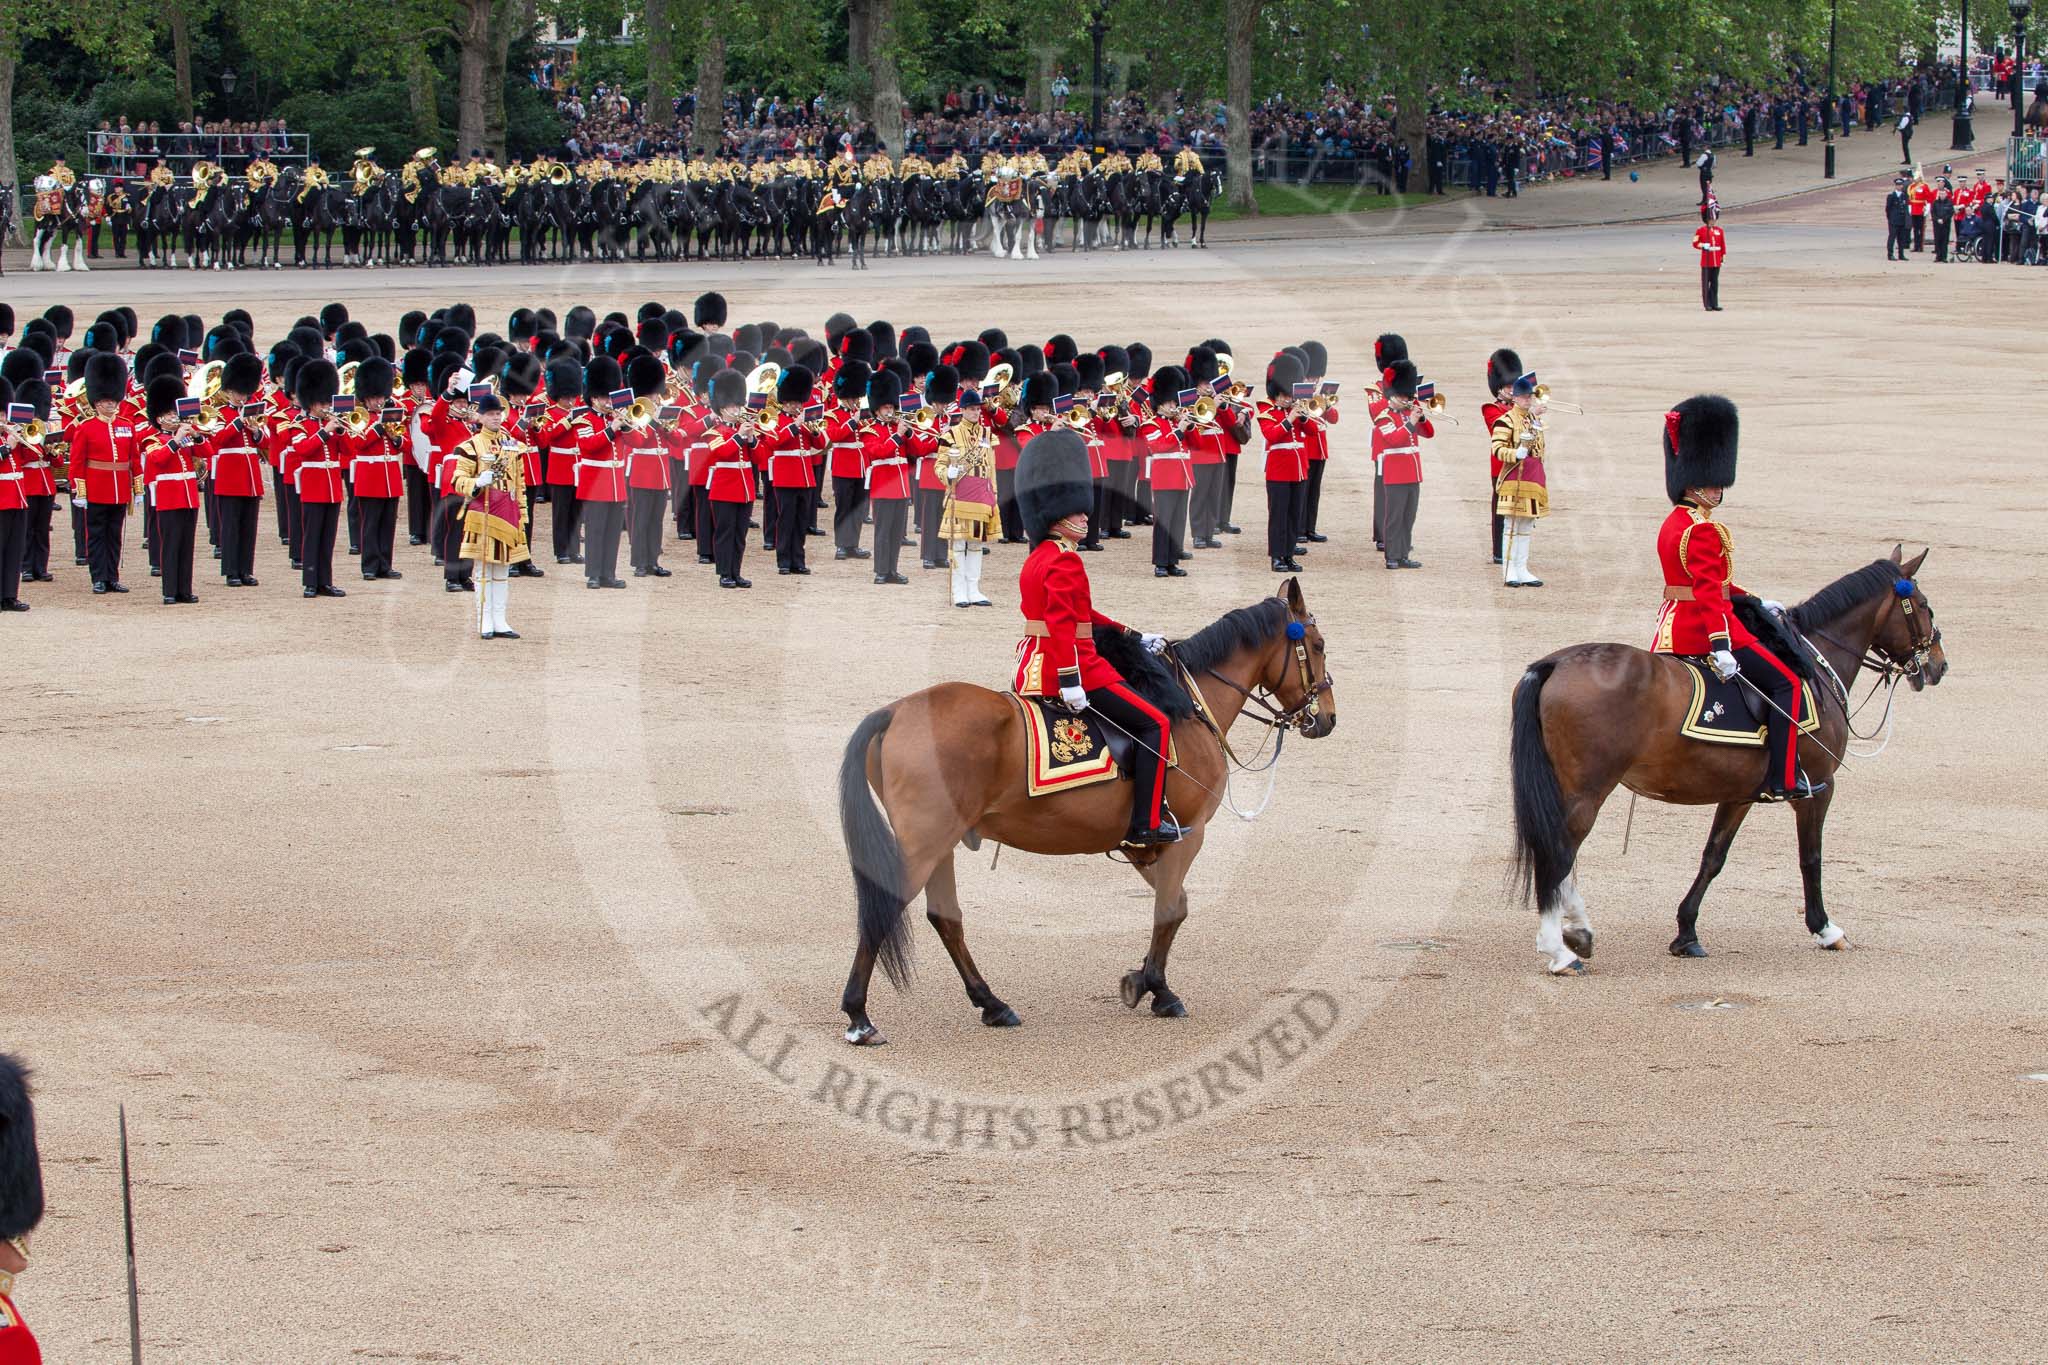 Trooping the Colour 2012: Riding past Her Majesty - the Major of the Parade, Major Mark Lewis, Welsh Guards, and the Field Officer, Lieutenant Colonel R C N Sergeant, Coldstream Guards, during the March Past..
Horse Guards Parade, Westminster,
London SW1,

United Kingdom,
on 16 June 2012 at 11:36, image #417